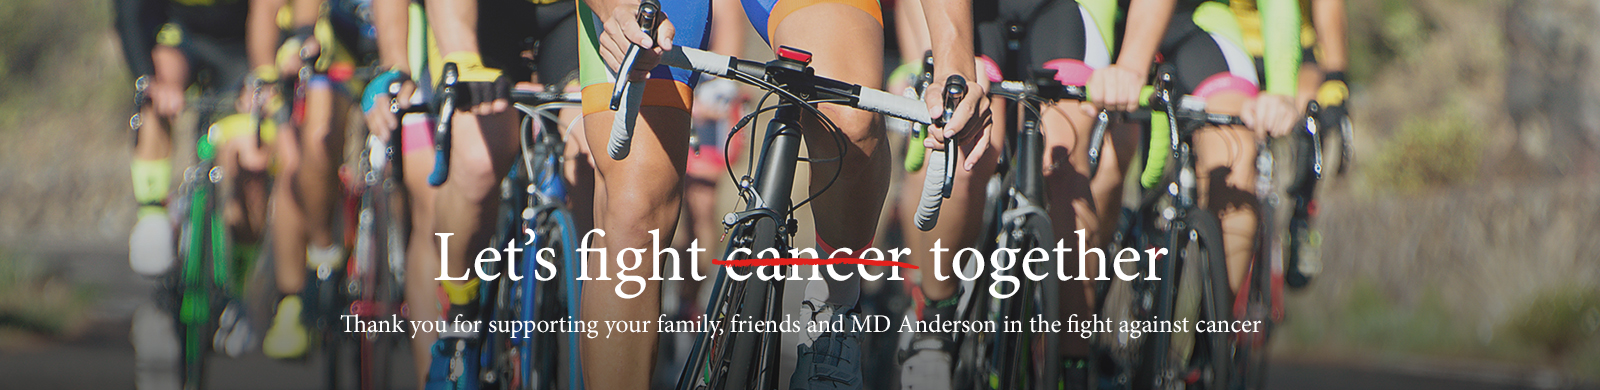 Let's fight cancer together. Thank you for supporting your family, friends and MD Anderson in the fight against cancer.